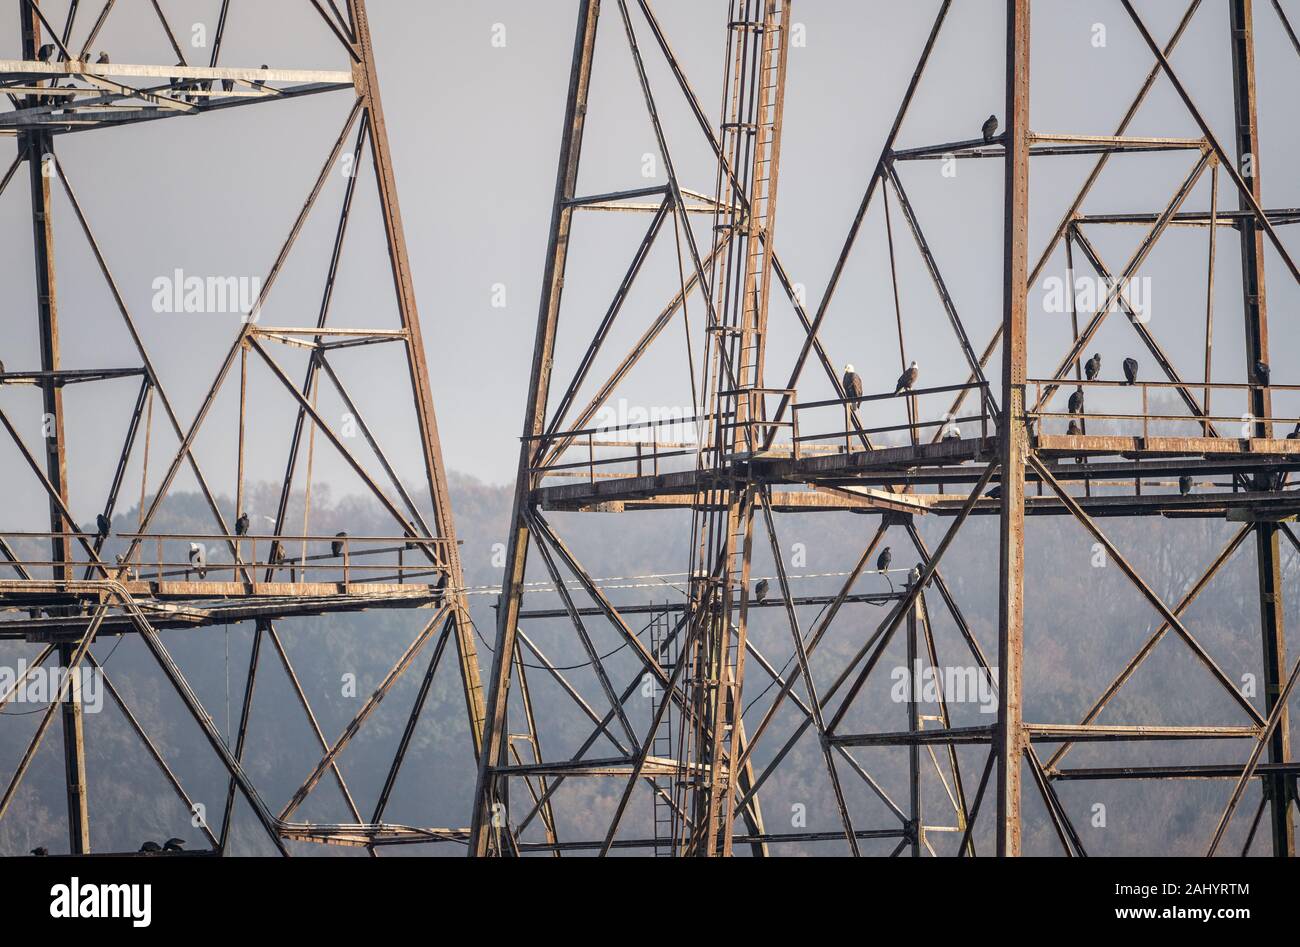 Bald Eagles and Black Vultures on electric towers, Conowingo, Md. Stock Photo